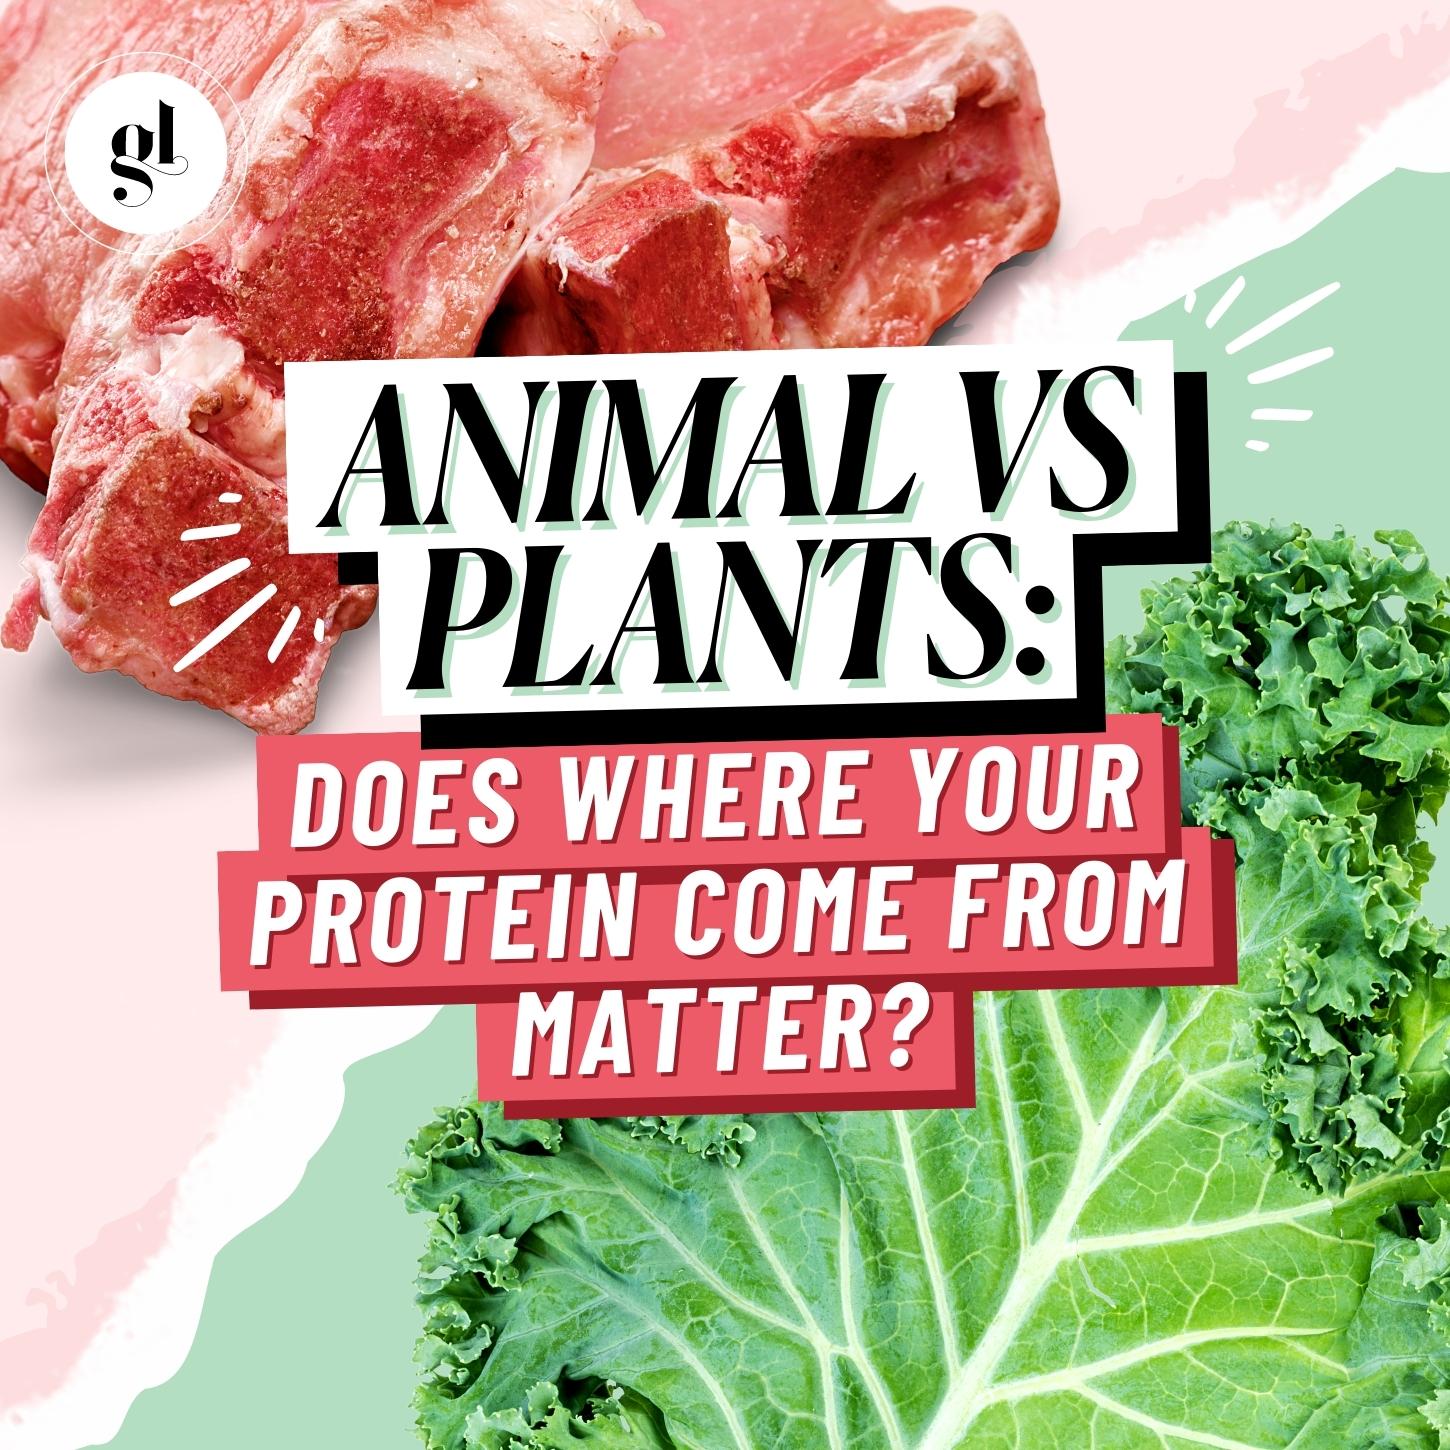 Animal vs Plants: Does Where Your Protein Come From Matter?